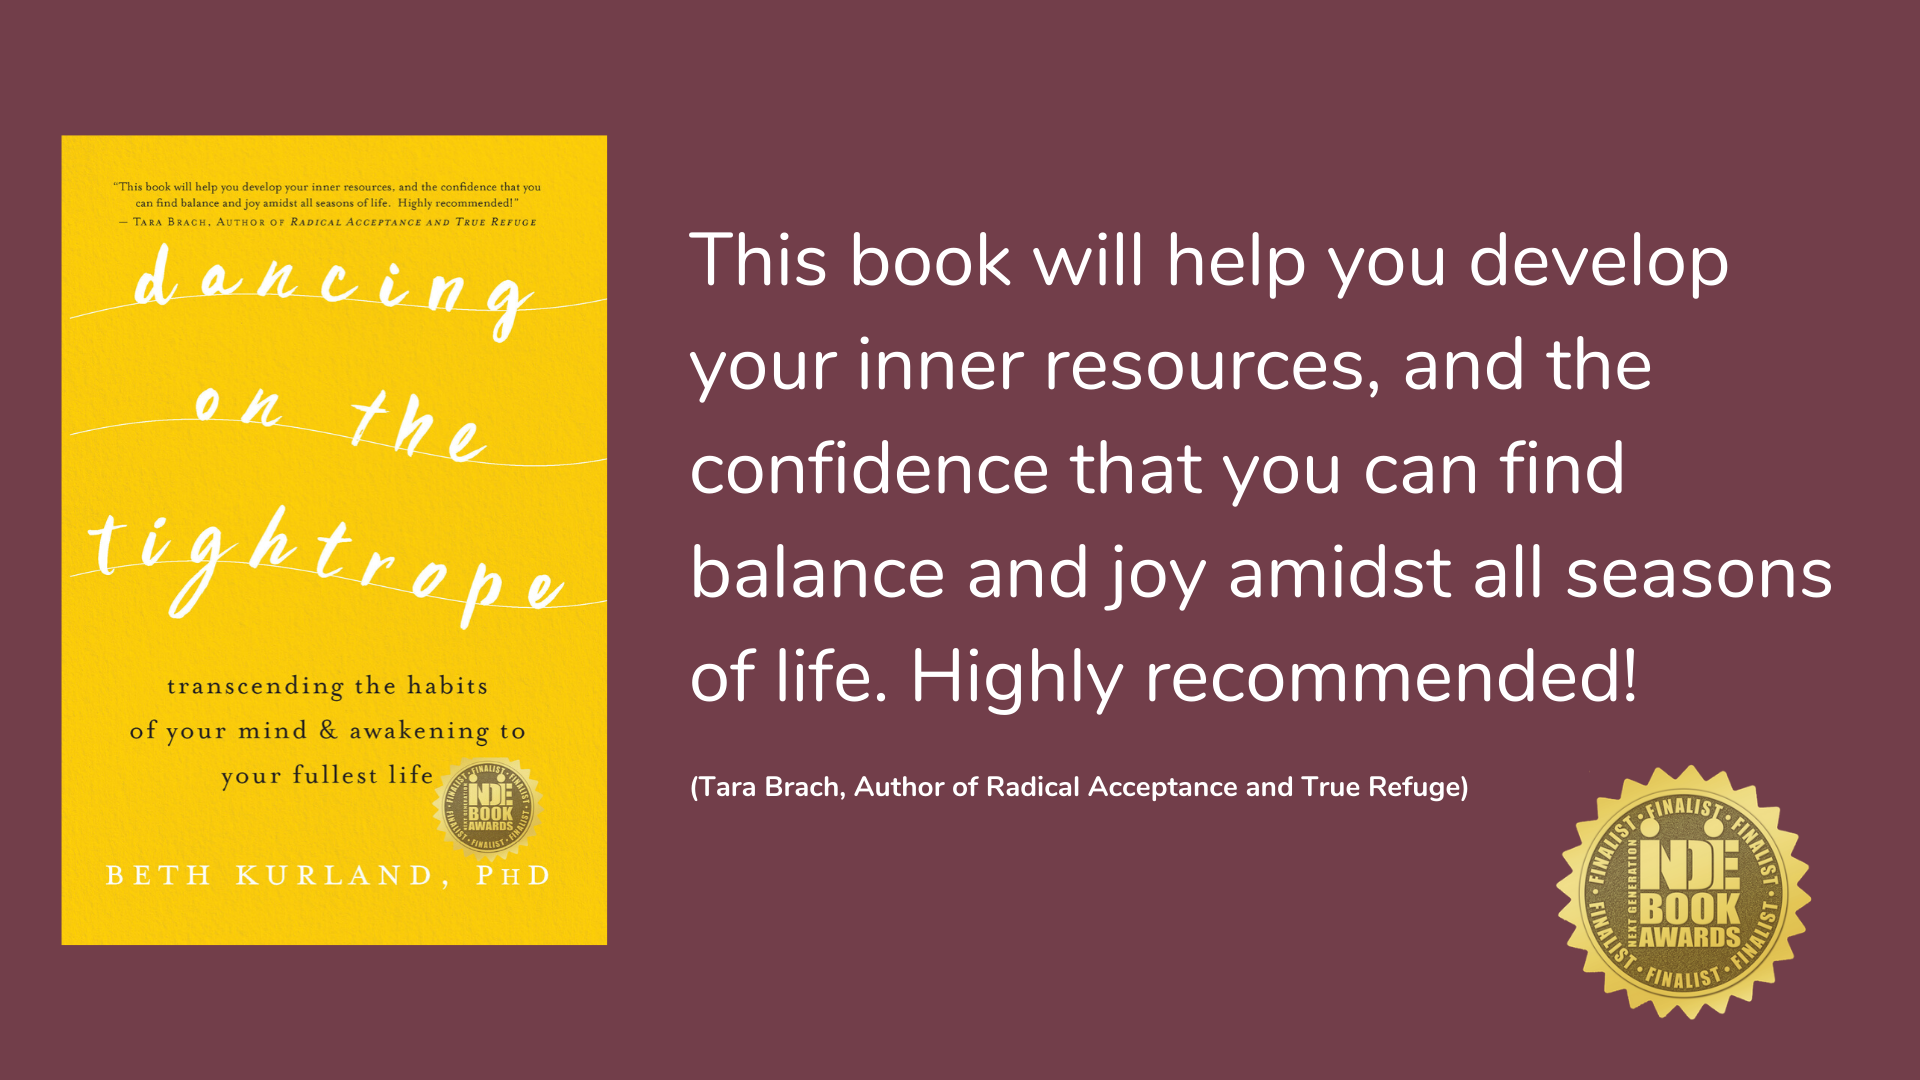 Dancing on the Tightrope:  Transcending the Habits of Your Mind and Awakening to Your Fullest Life